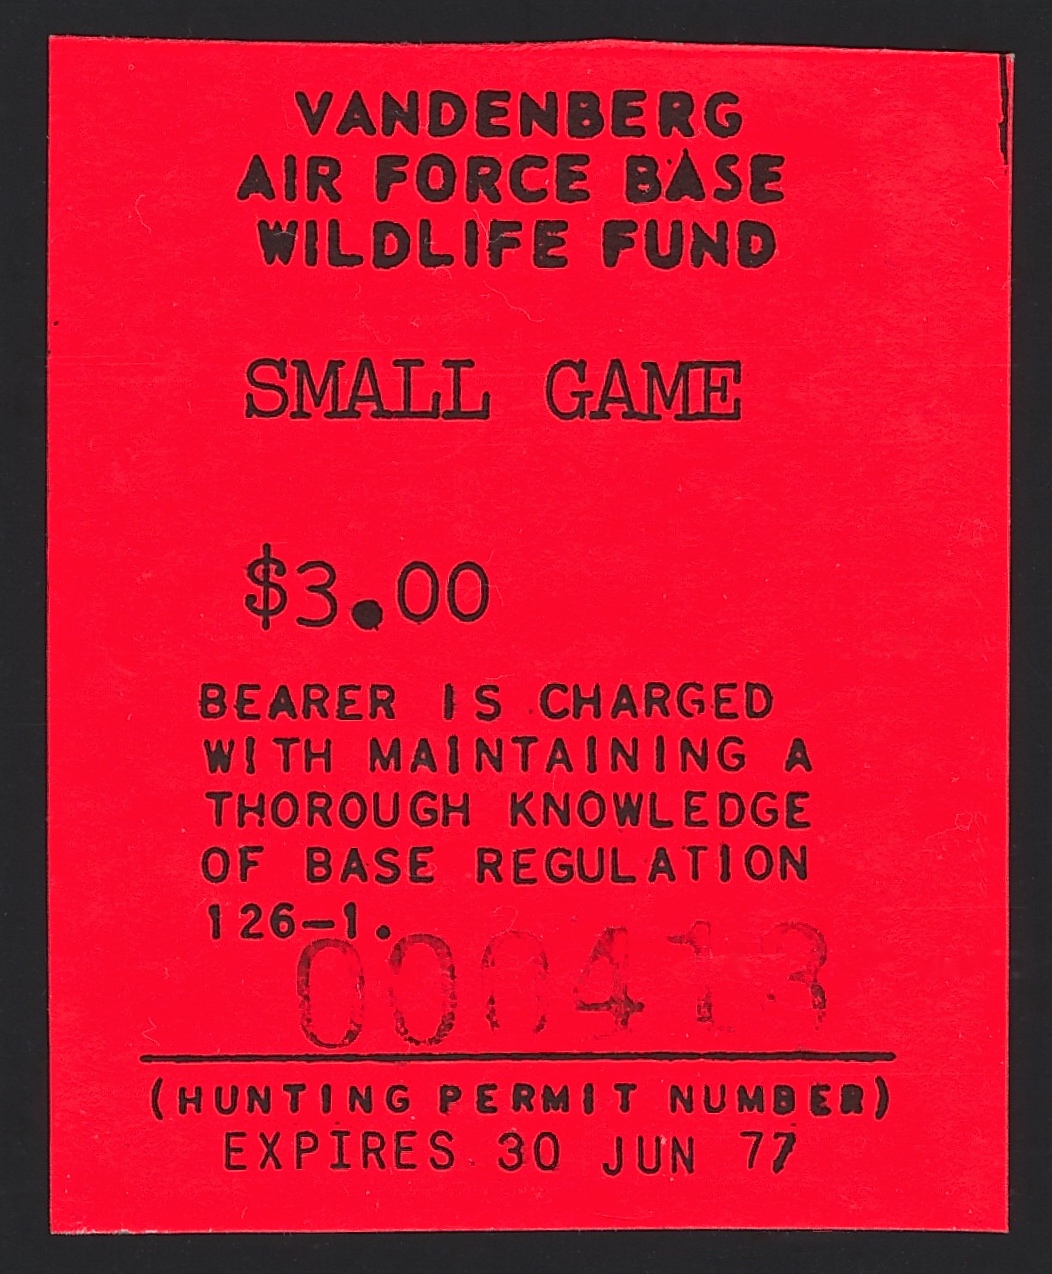 1976-77 VAFB Small Game